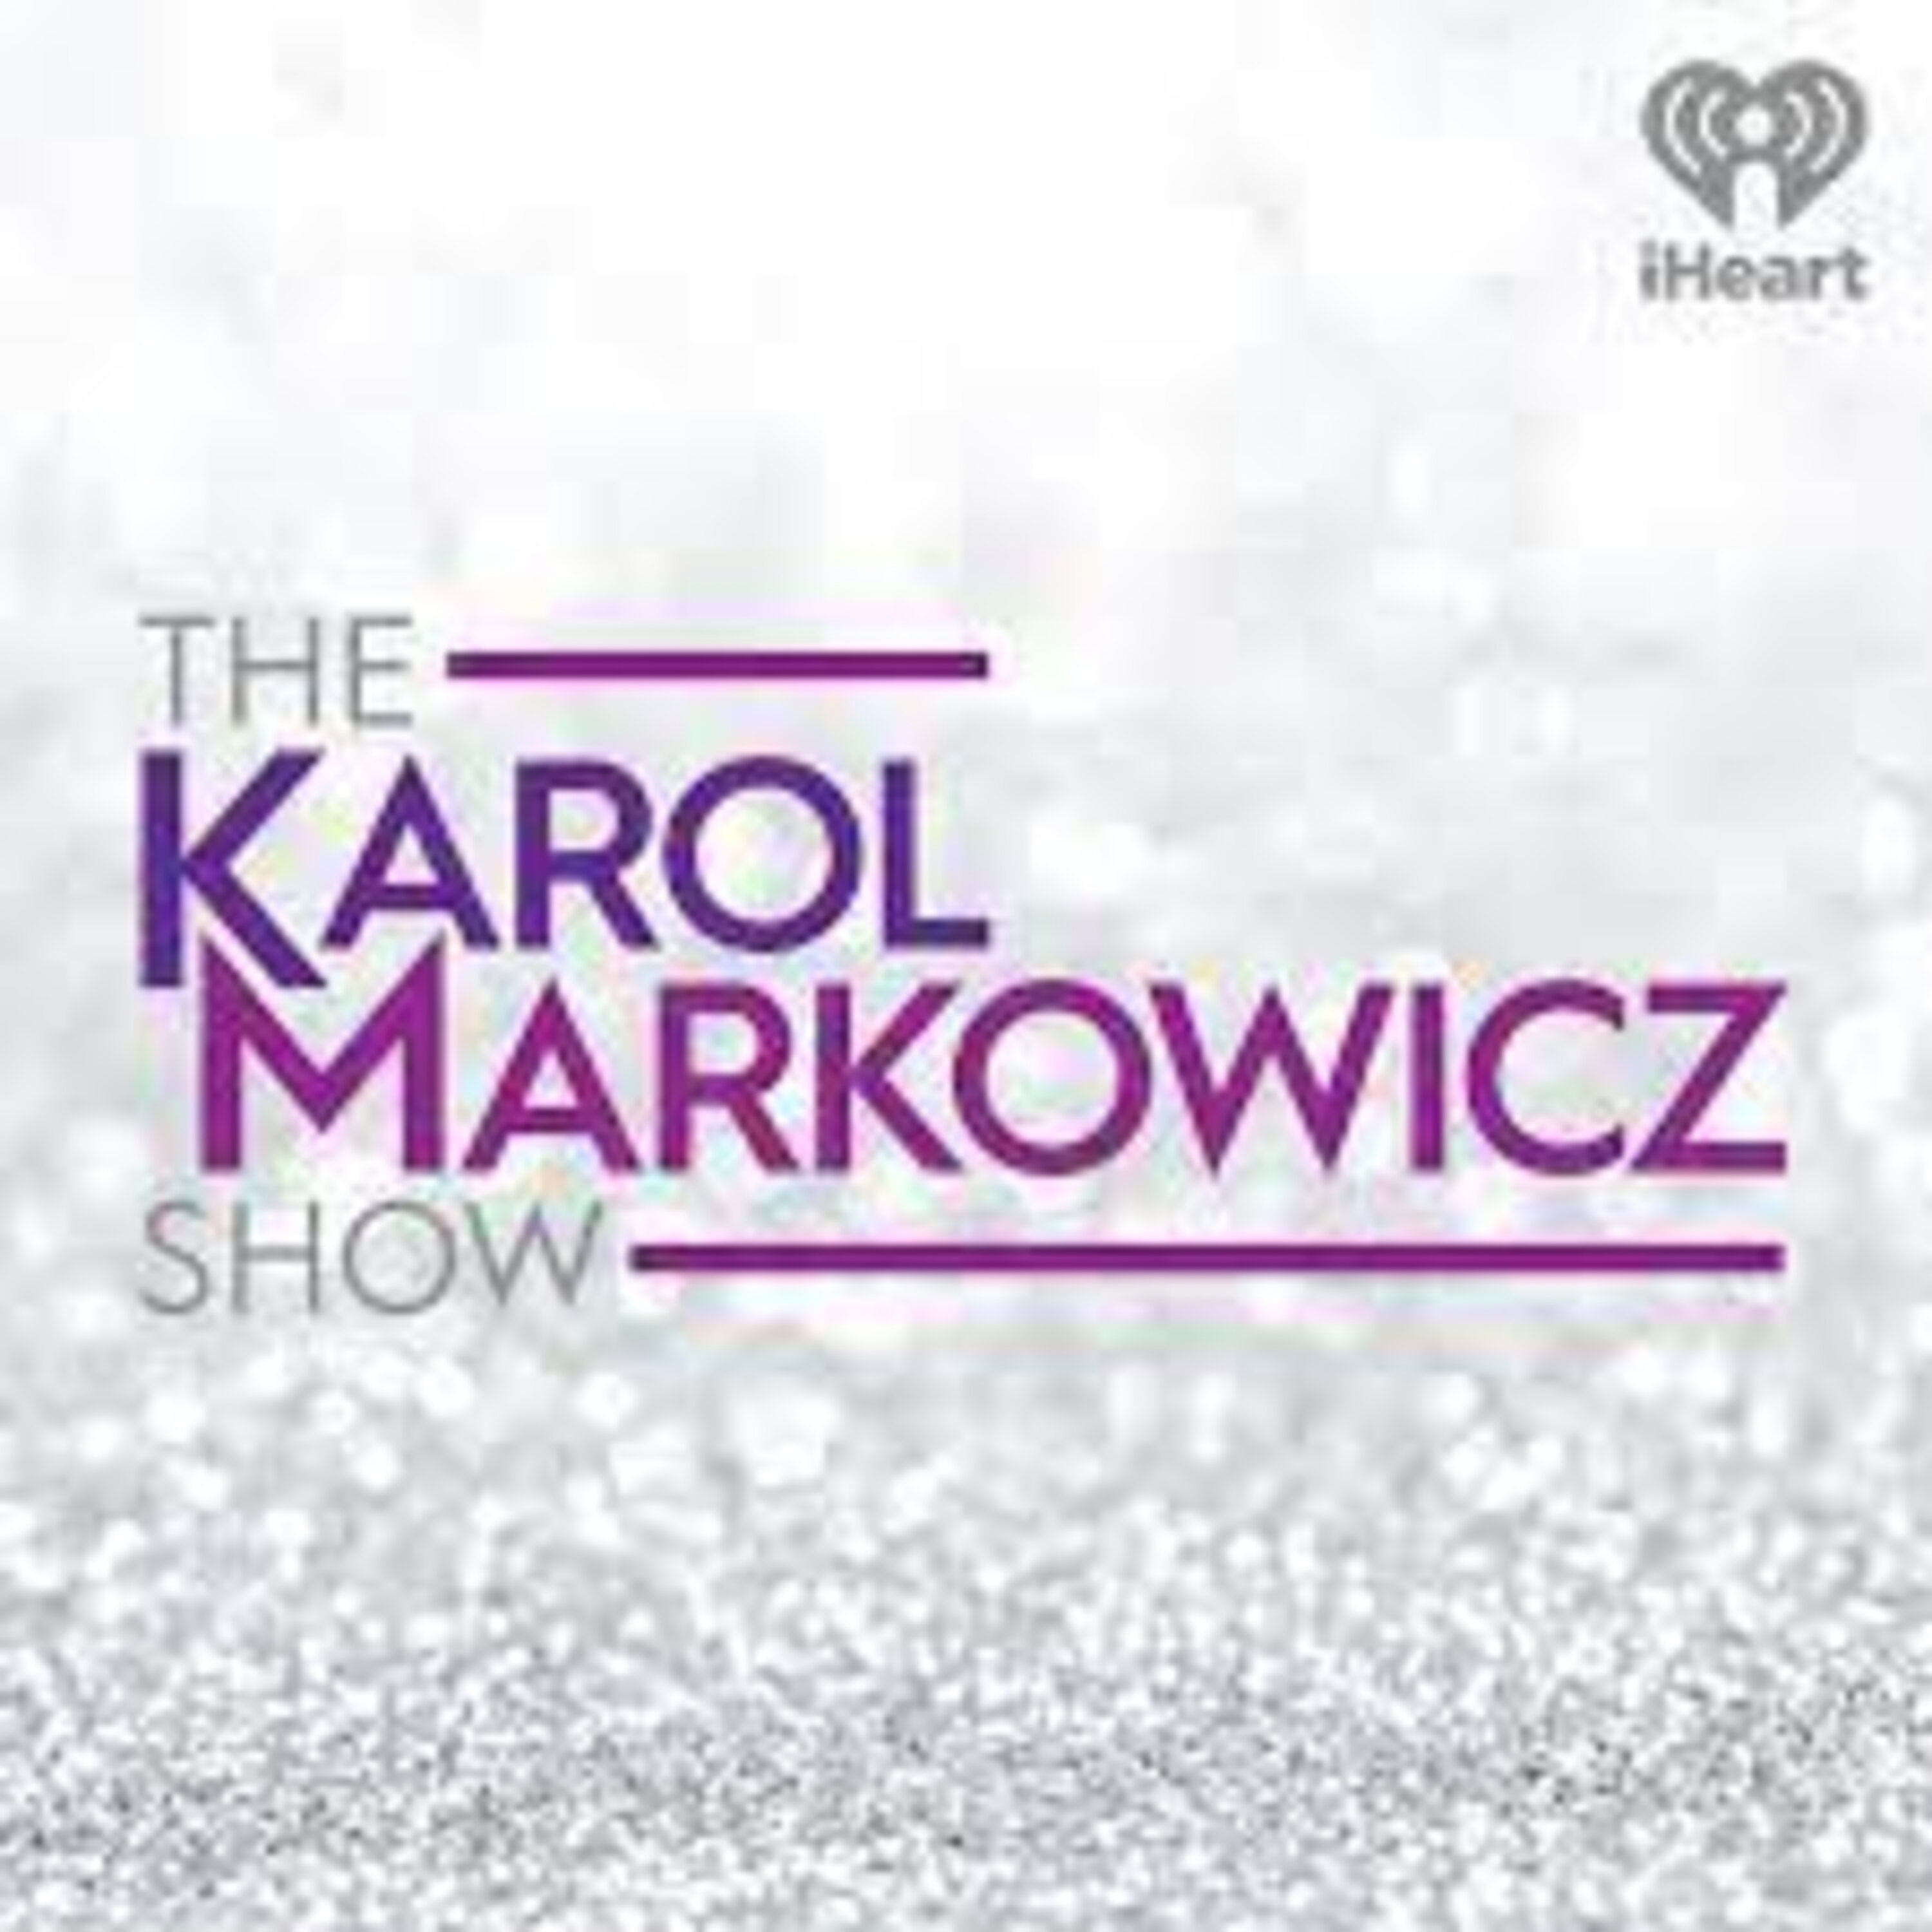 The Karol Markowicz Show: Grabbing A Slice with National Review's Phil Klein